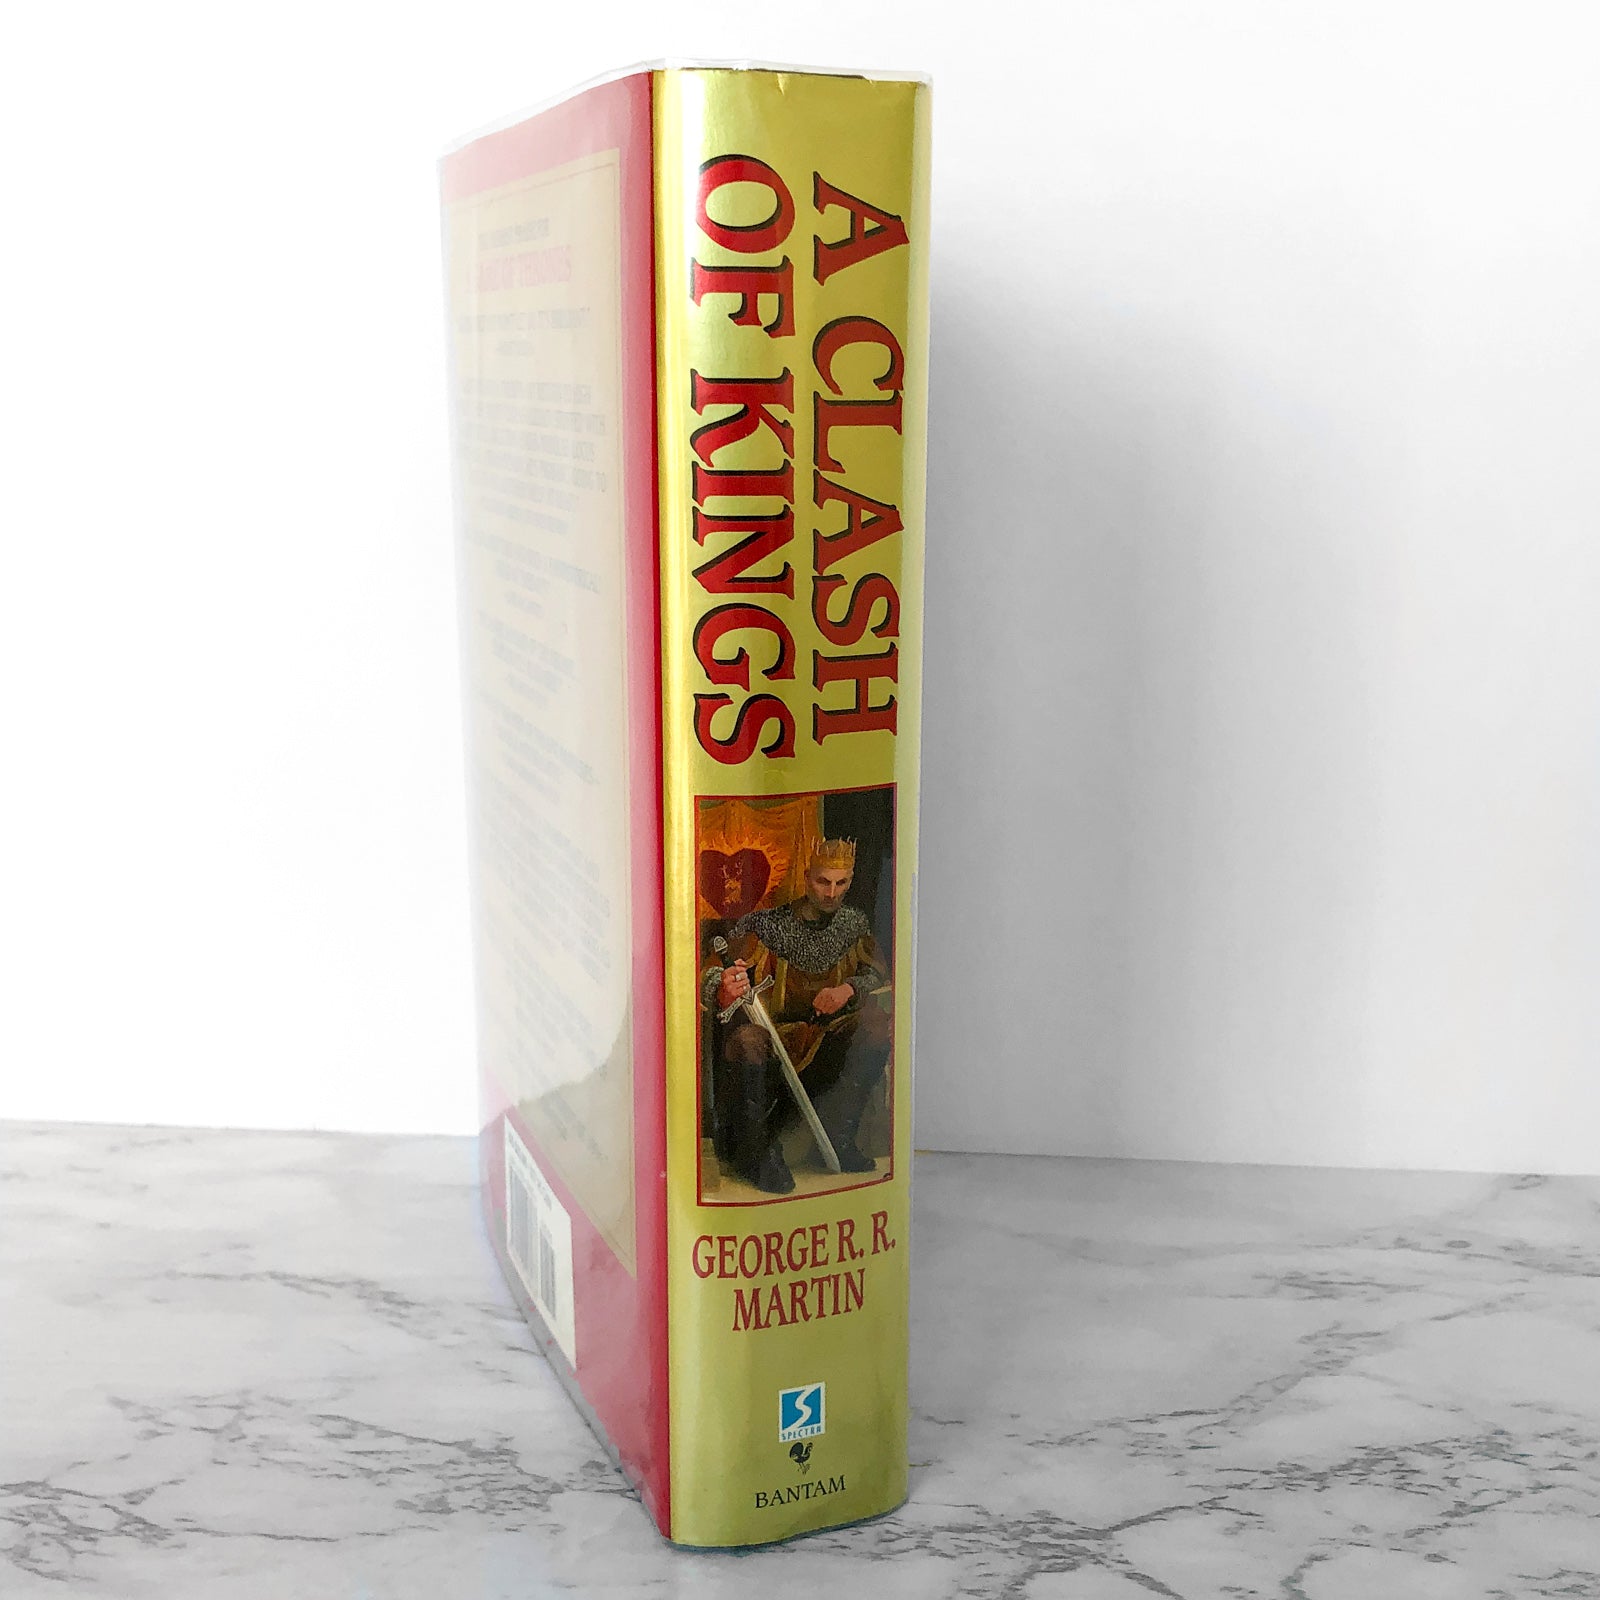 A Clash of Kings (A Song of Ice and Fire, #2) by George R.R.